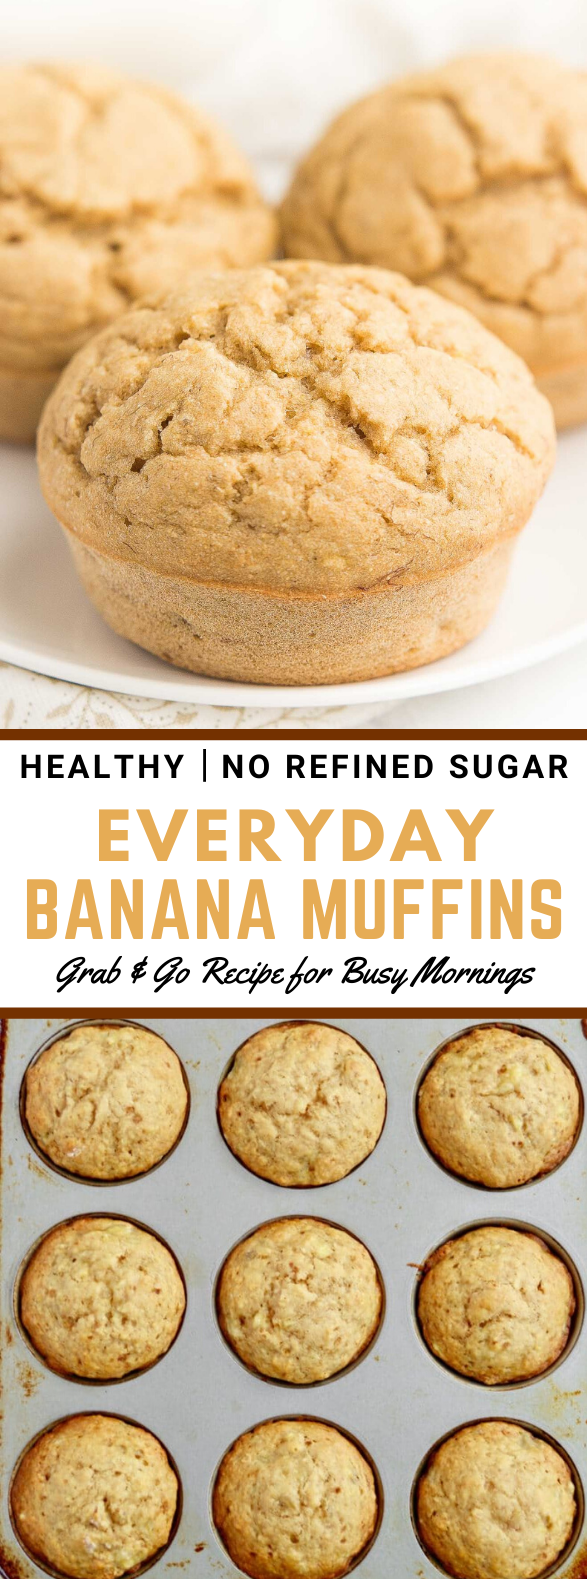 BANANA MUFFINS WITH NO REFINED SUGAR FOR EVERYDAY #healthy #breakfast